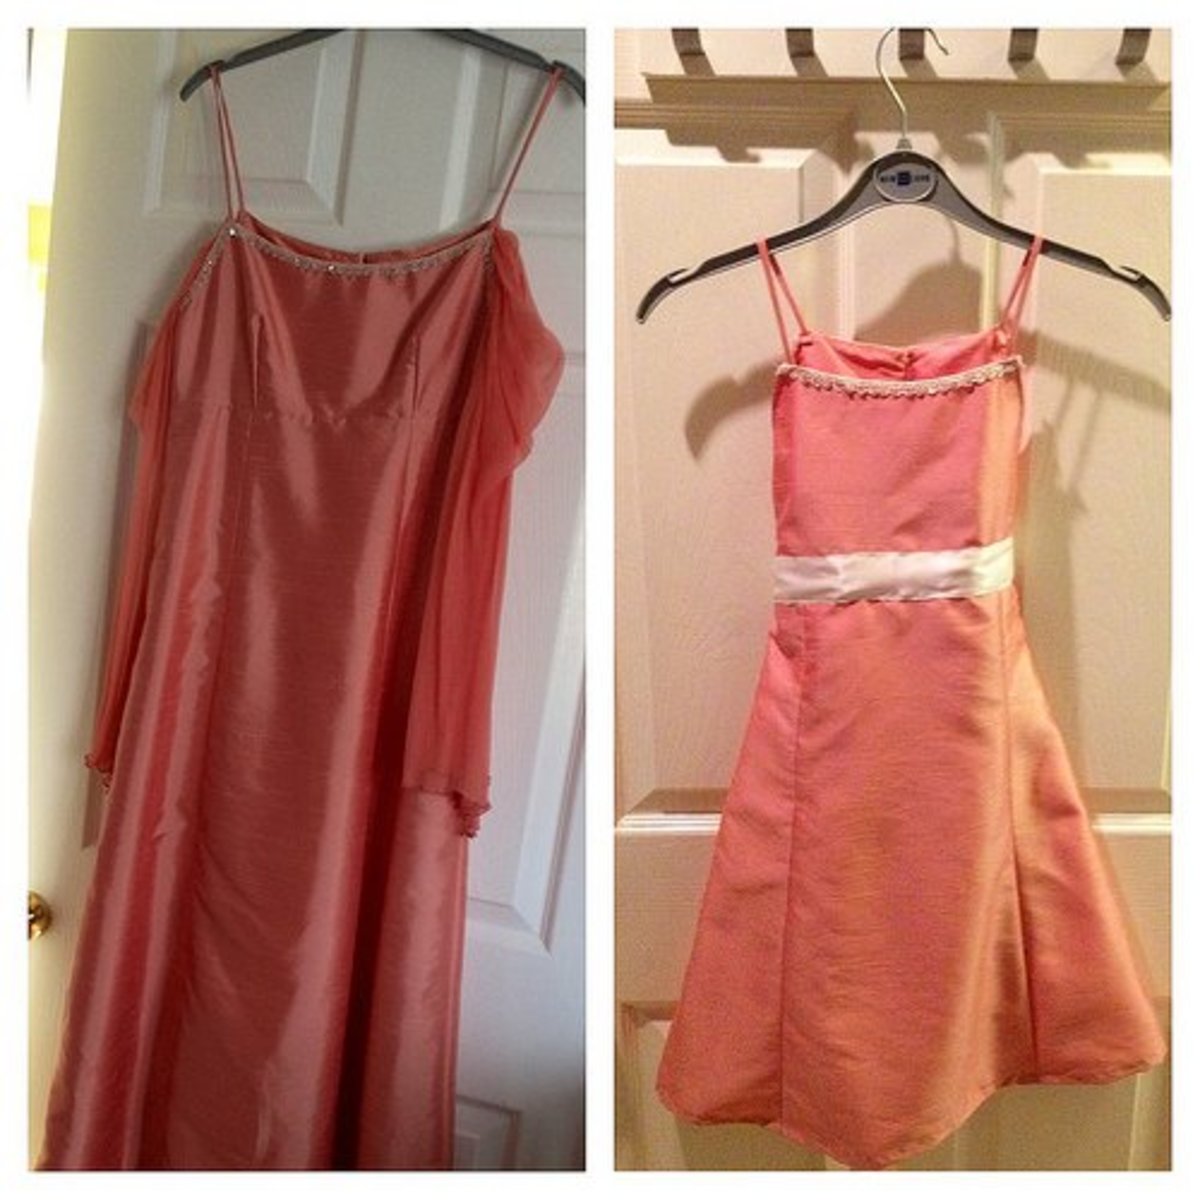 bridesmaid-dresses-10-neat-ways-to-reuse-yours